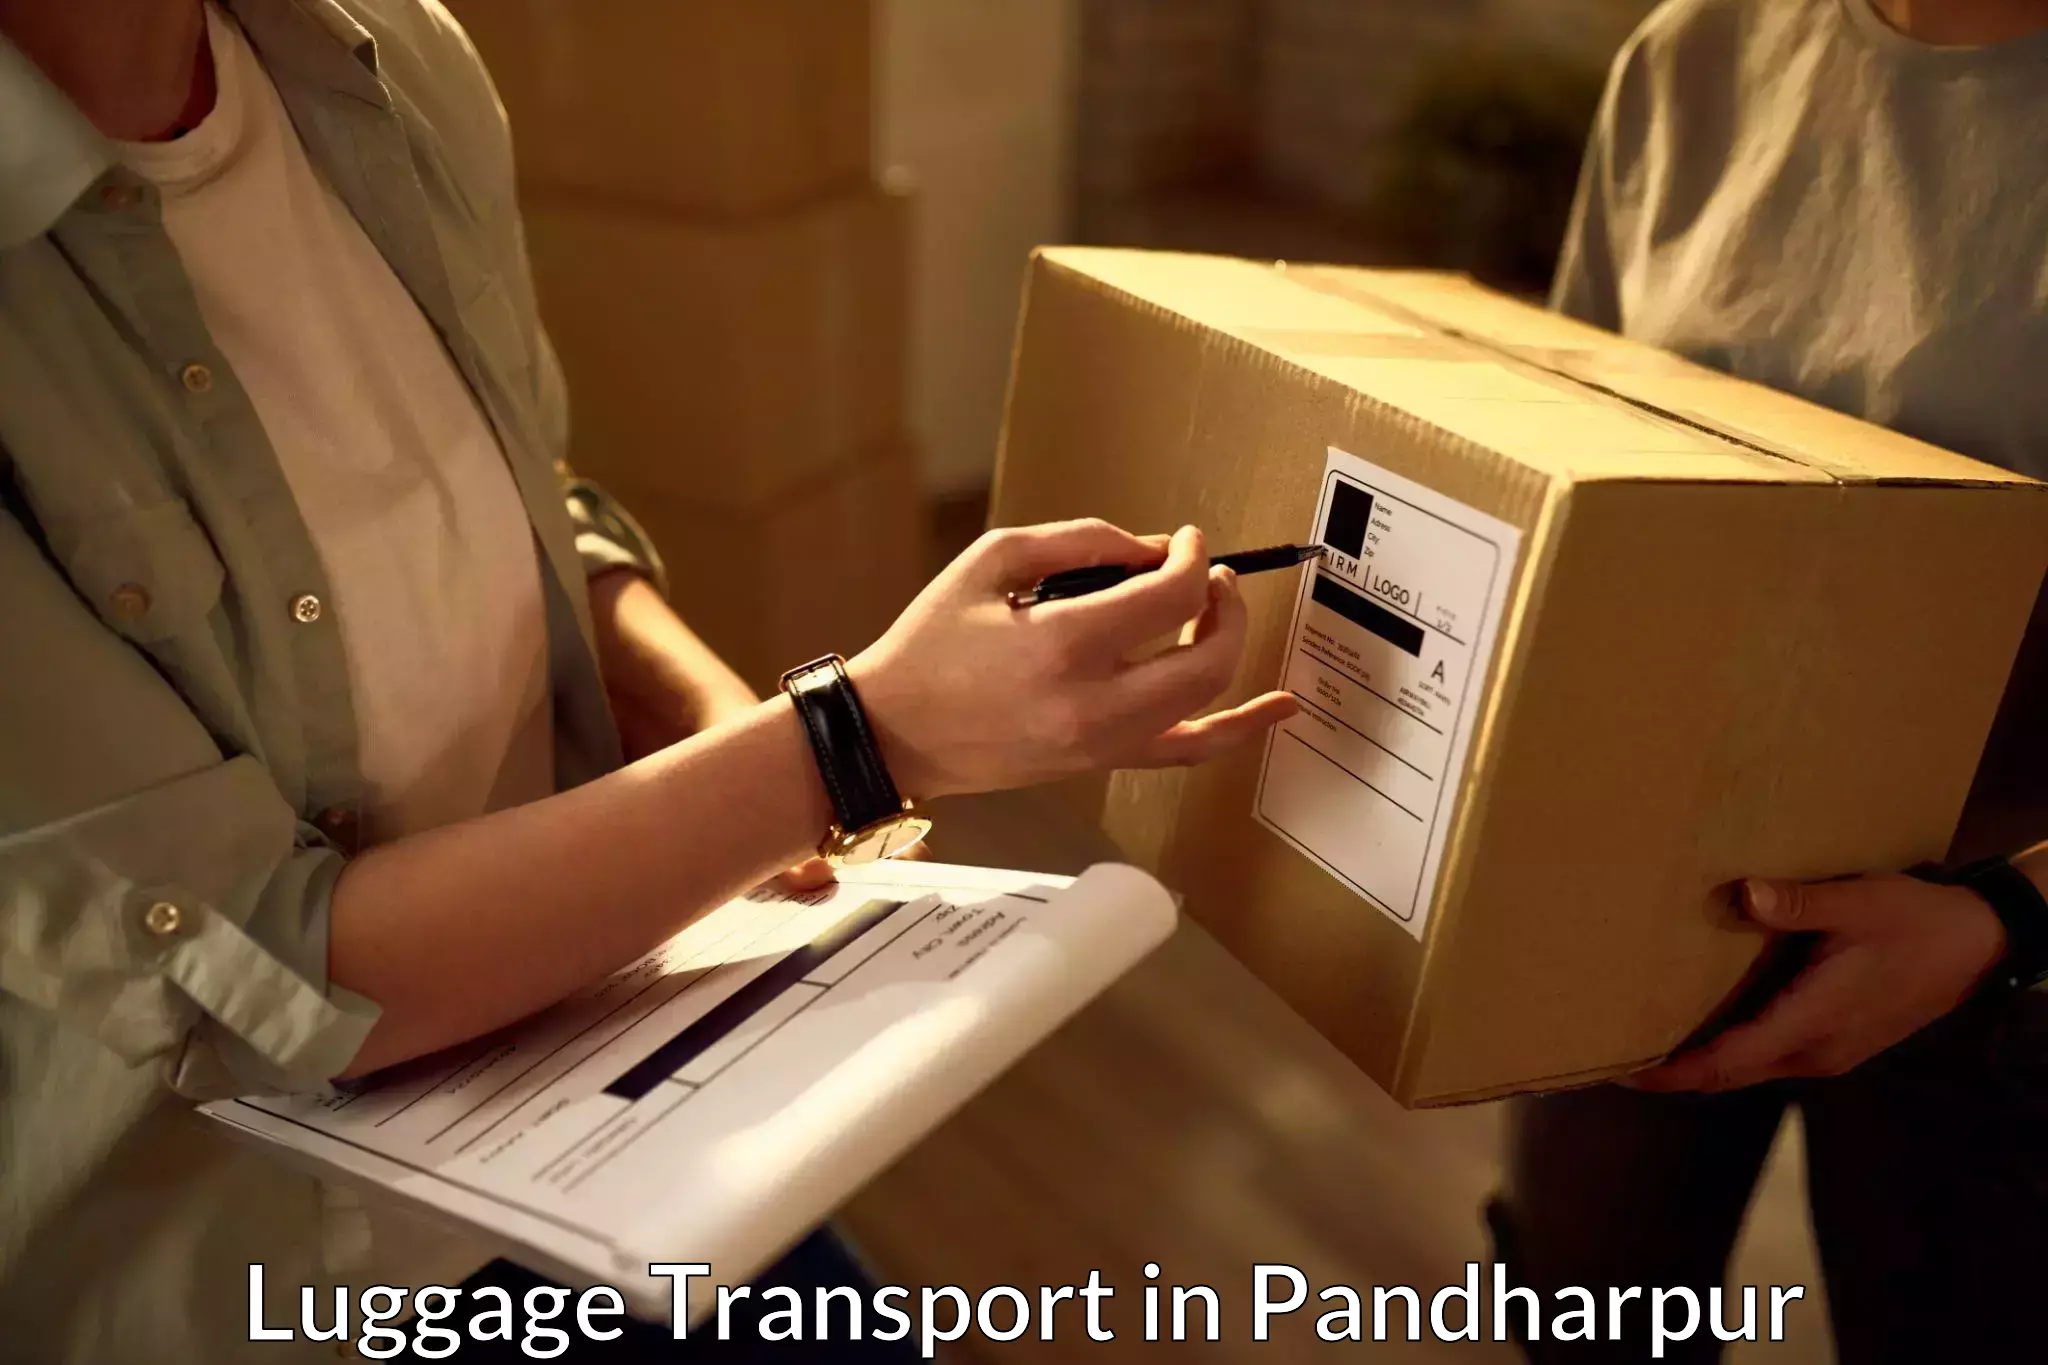 Baggage delivery management in Pandharpur